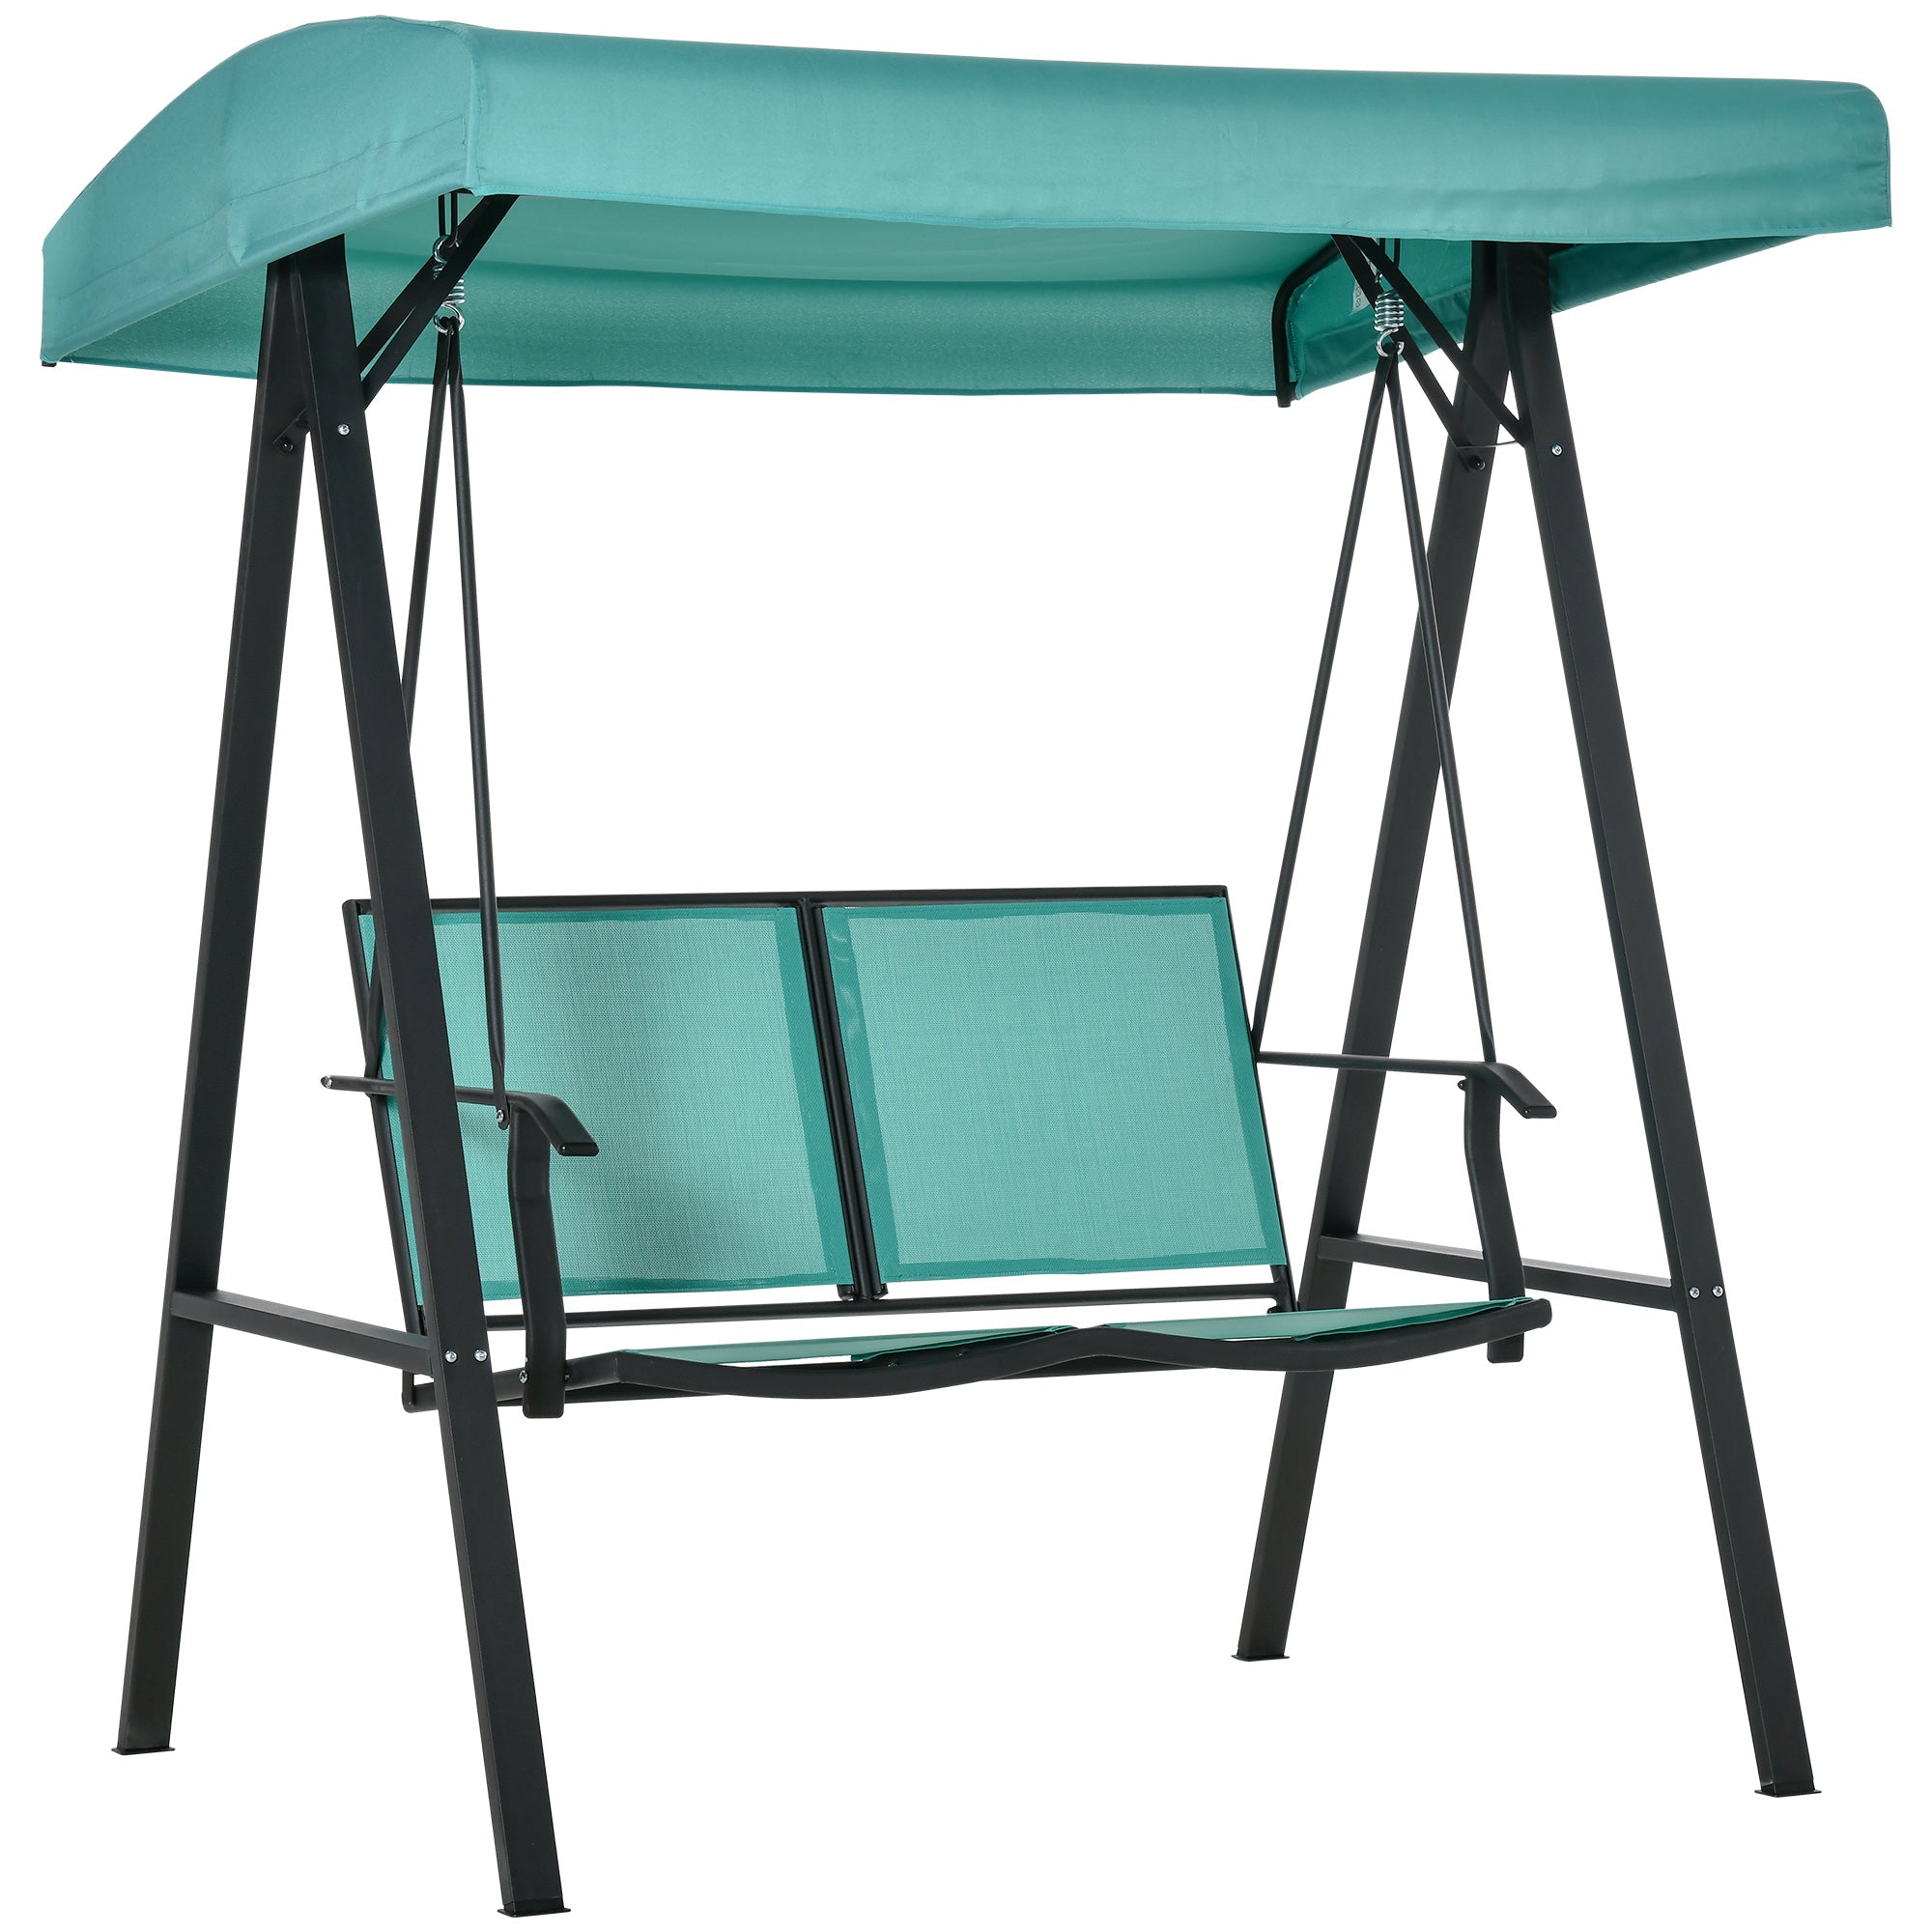 Outsunny 2 Seater Garden Swing Bench w/ Tilting Canopy Texteline Seat Lake Blue  | TJ Hughes